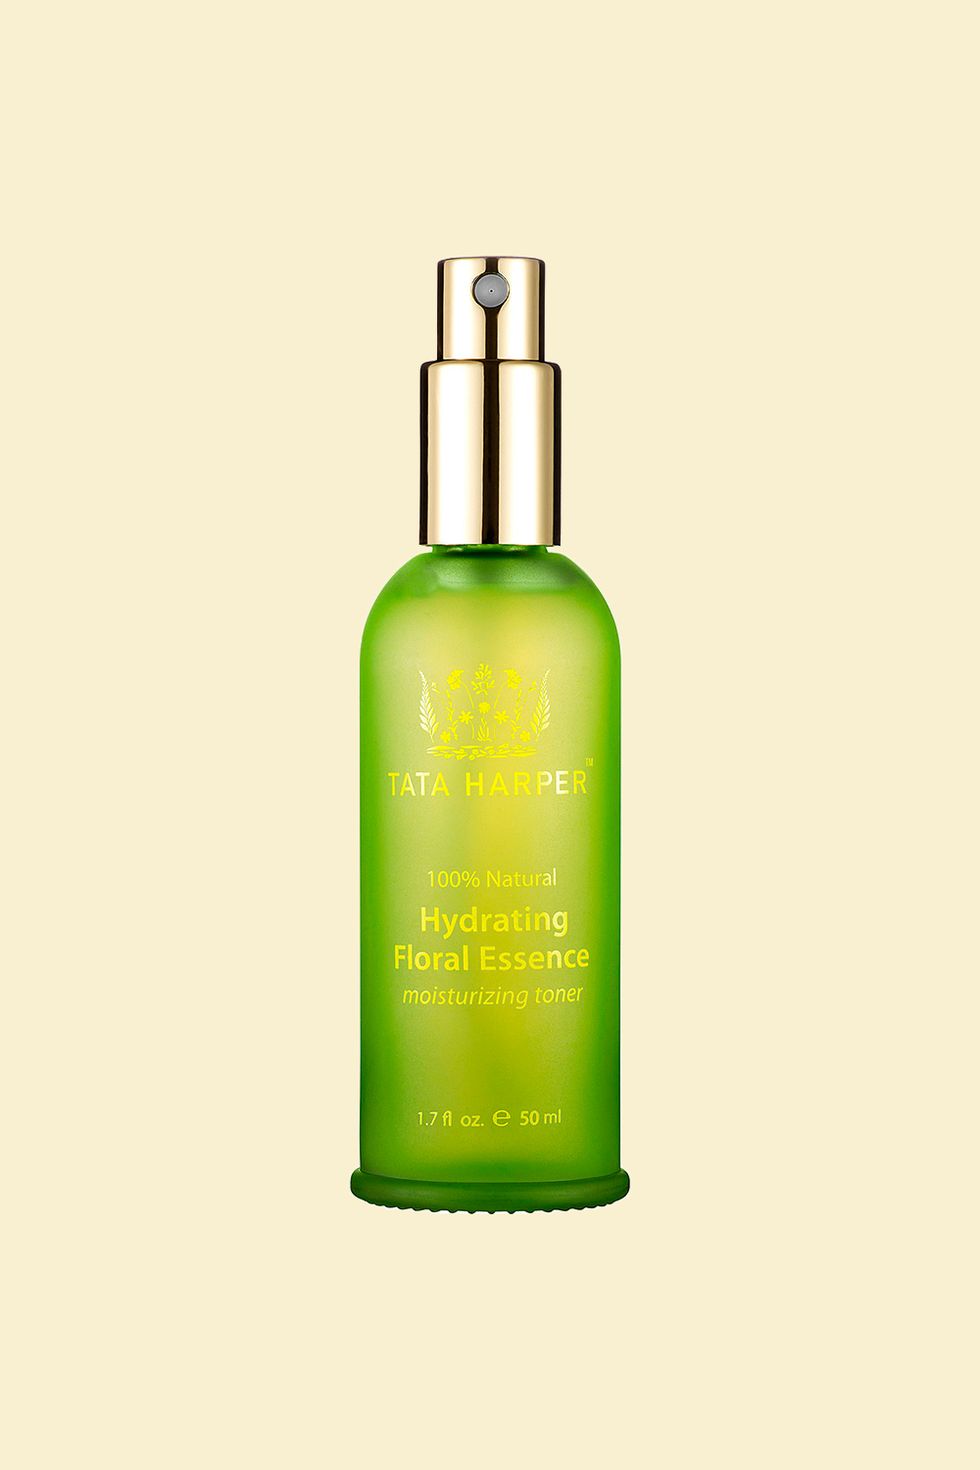 <p>It may not be serum-level in terms of the&nbsp;concentration, but this lightweight mist delivers glow-inducing moisture and a plumped-up complexion you can see&nbsp;thanks to its&nbsp;biocompatible hyaluronic acid and natural humectants, which&nbsp;draw moisture from the environment for extra hydration.</p><p><br></p><p>Tata Harper Hydrating Floral Essence, $89; <a href="http://bit.ly/2dfZpWT" target="_blank">sephora.com</a>.</p>